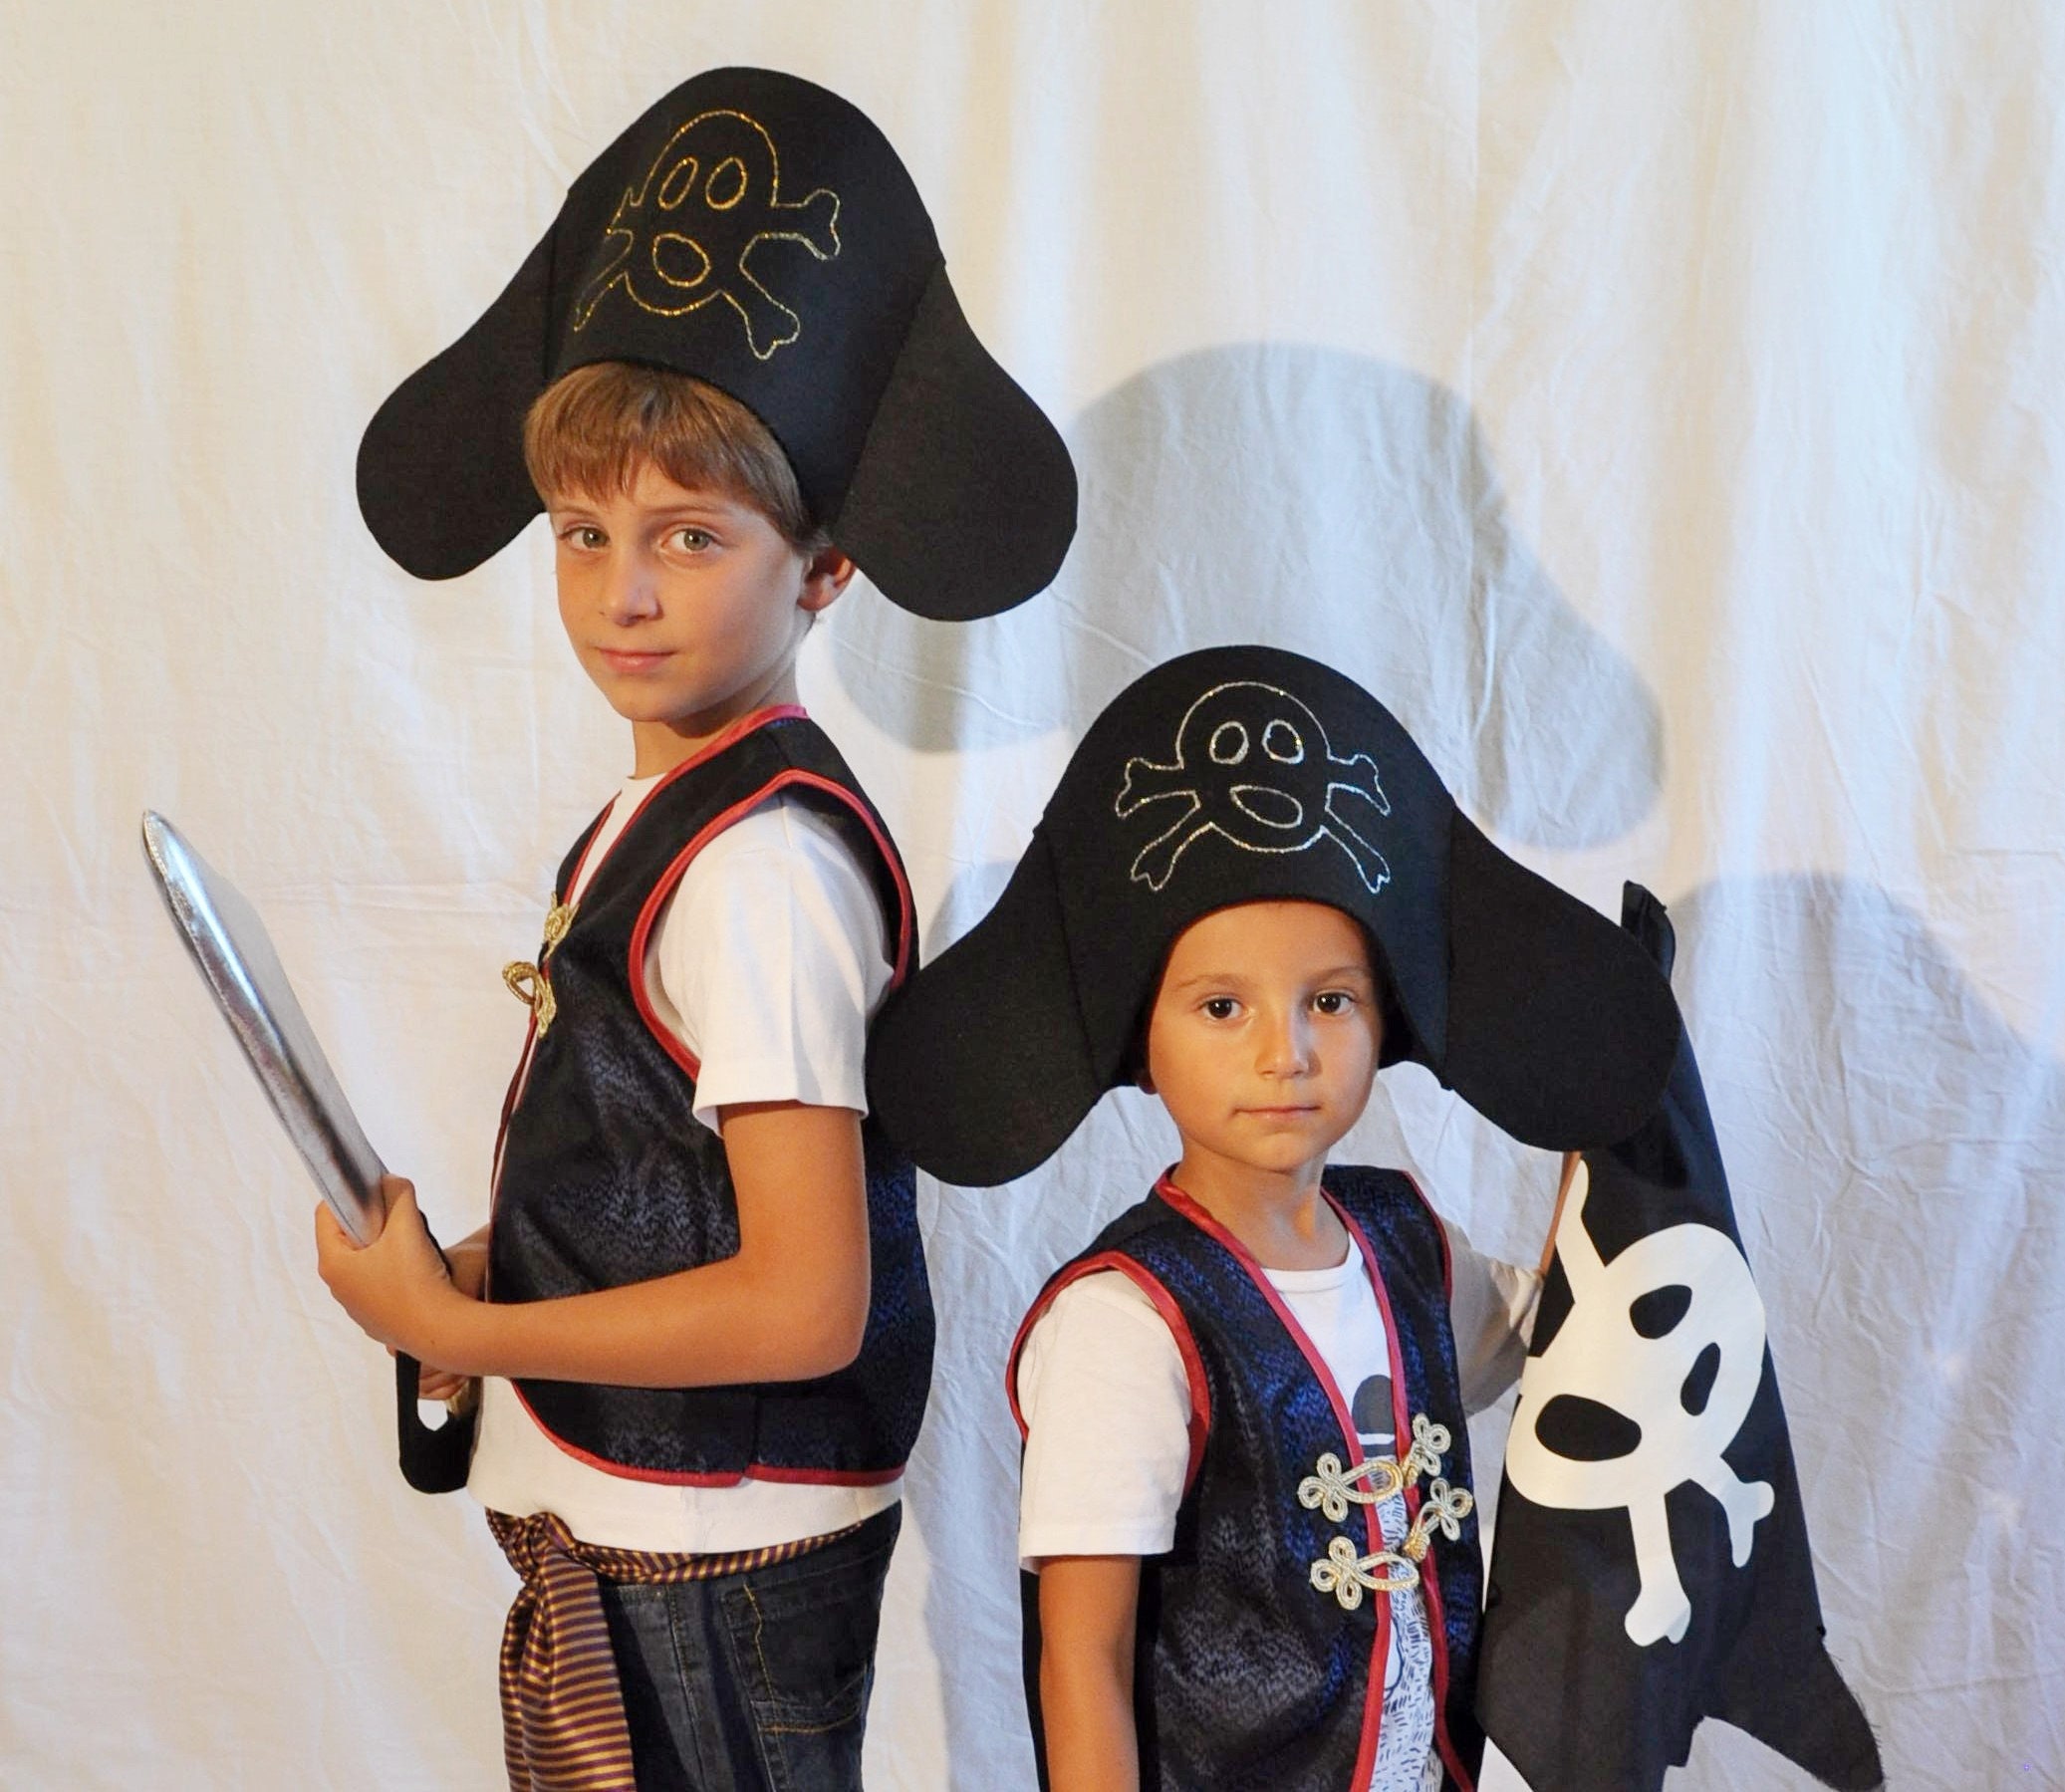 Kids Pirate Costume, Pirate Vest, Boy Pirate Costume, Gilet Pirate in Damask Fabric and Painted Skull, Kids Costumes, Dress Up Clothes